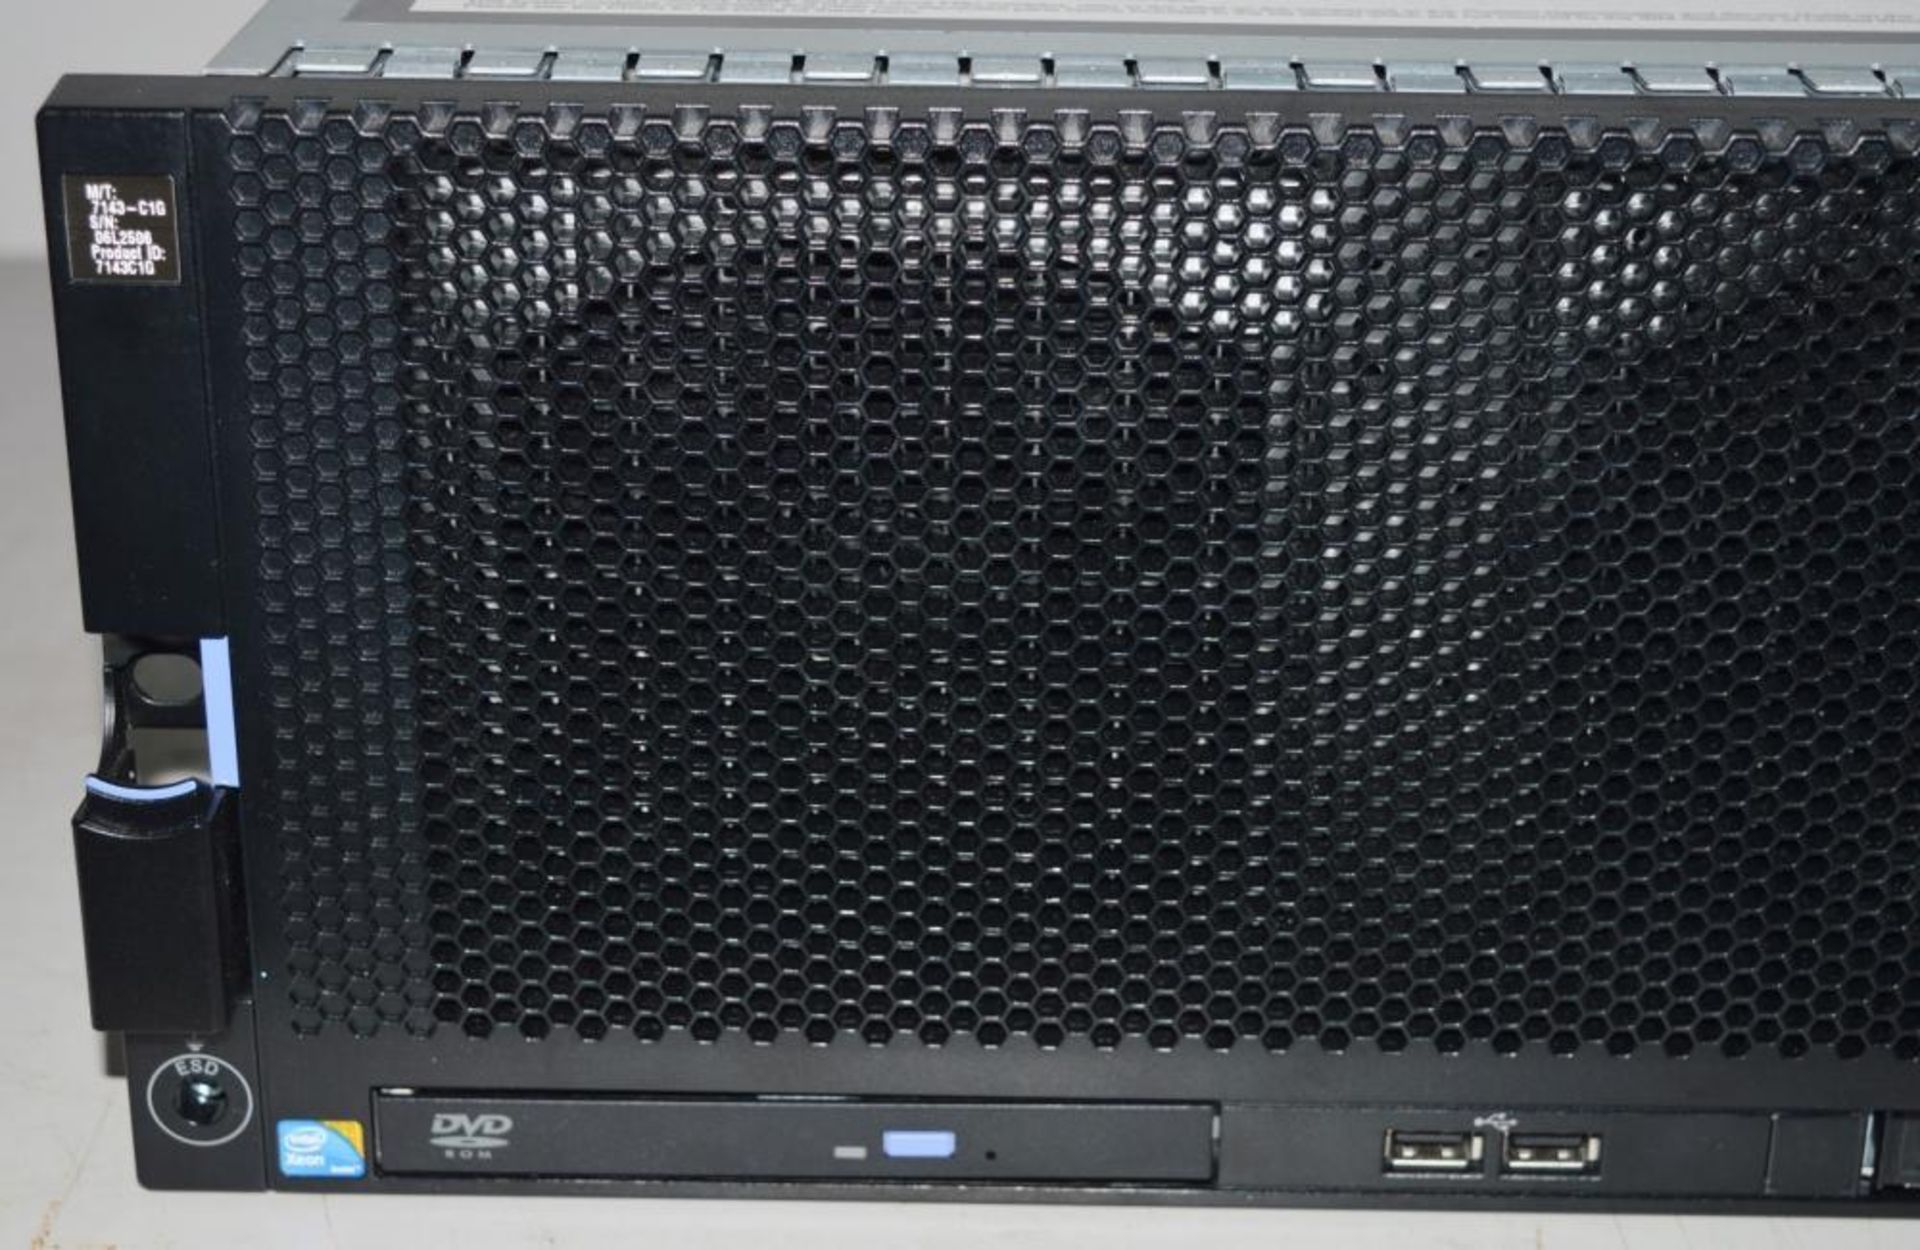 1 x IBM System X3850 X5 Rack Mount Server - Features 4 x Intel 10 Core E7-8850 2ghz Processors, - Image 5 of 9